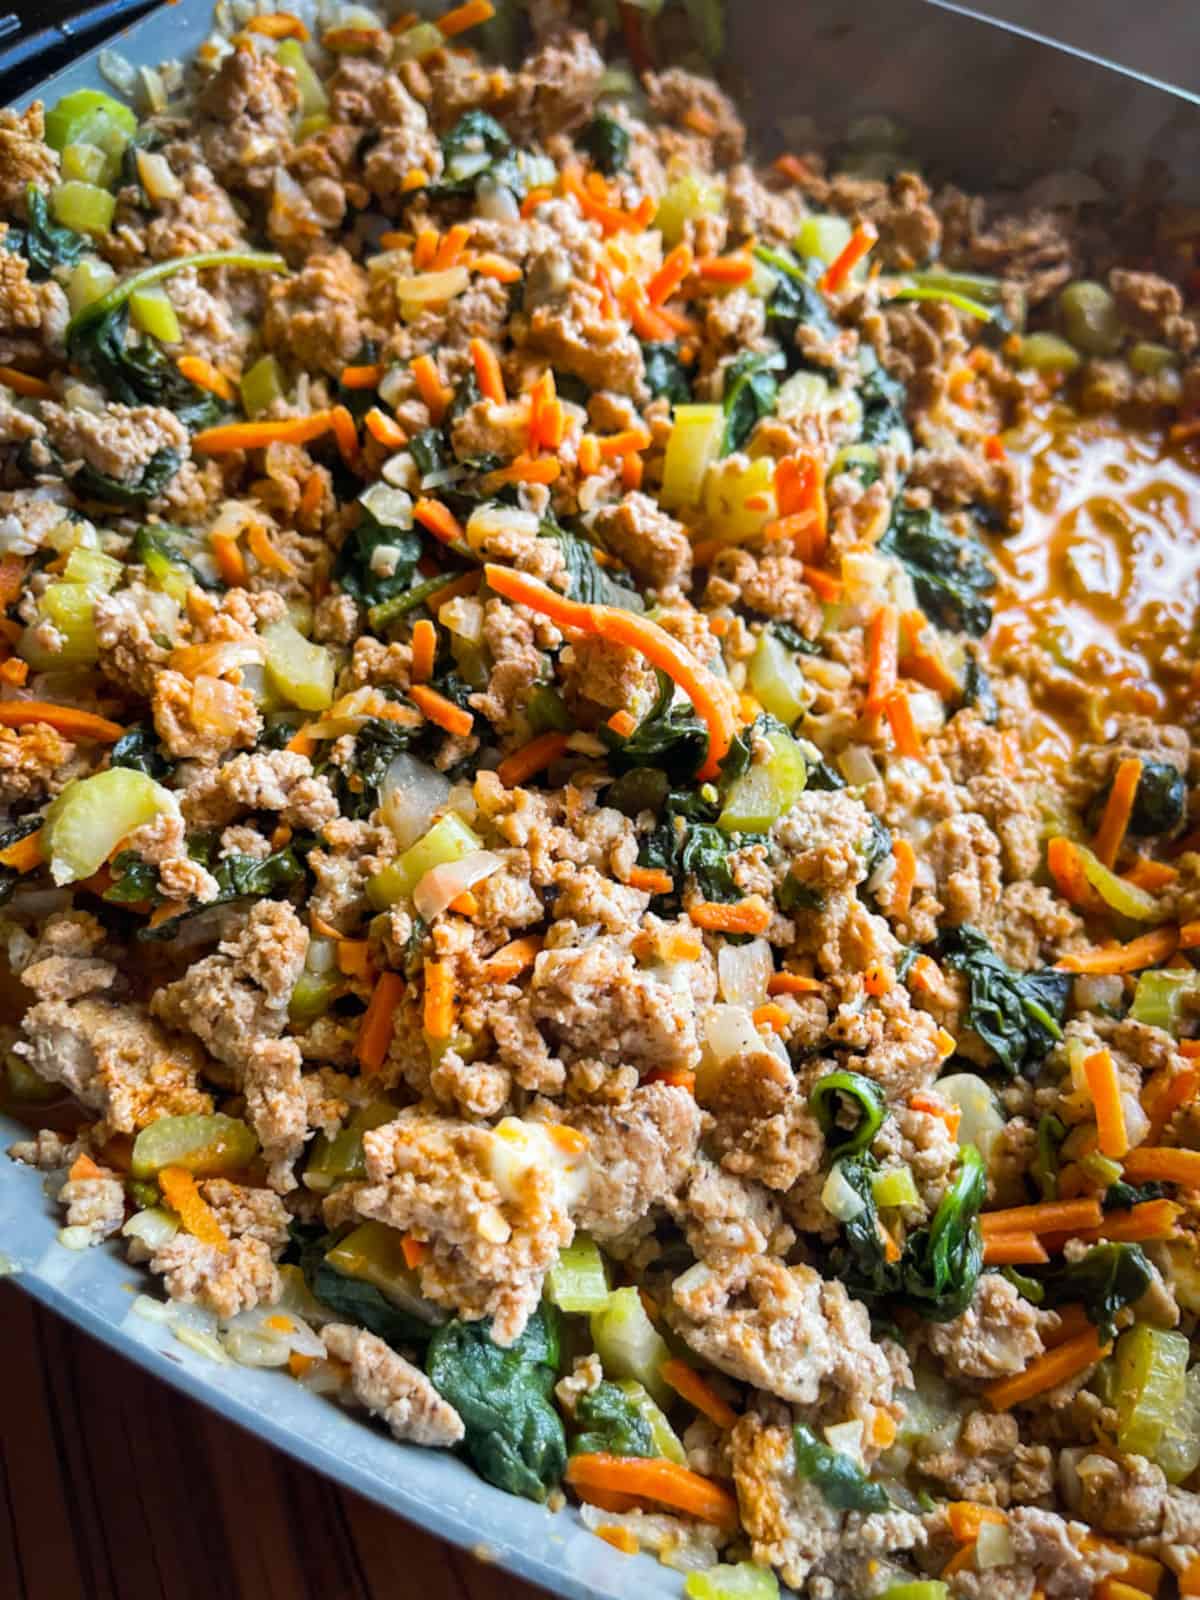 A close up of ground turkey cooked with celery, shredded carrots, garlic, onion, and spinach in buffalo sauce.